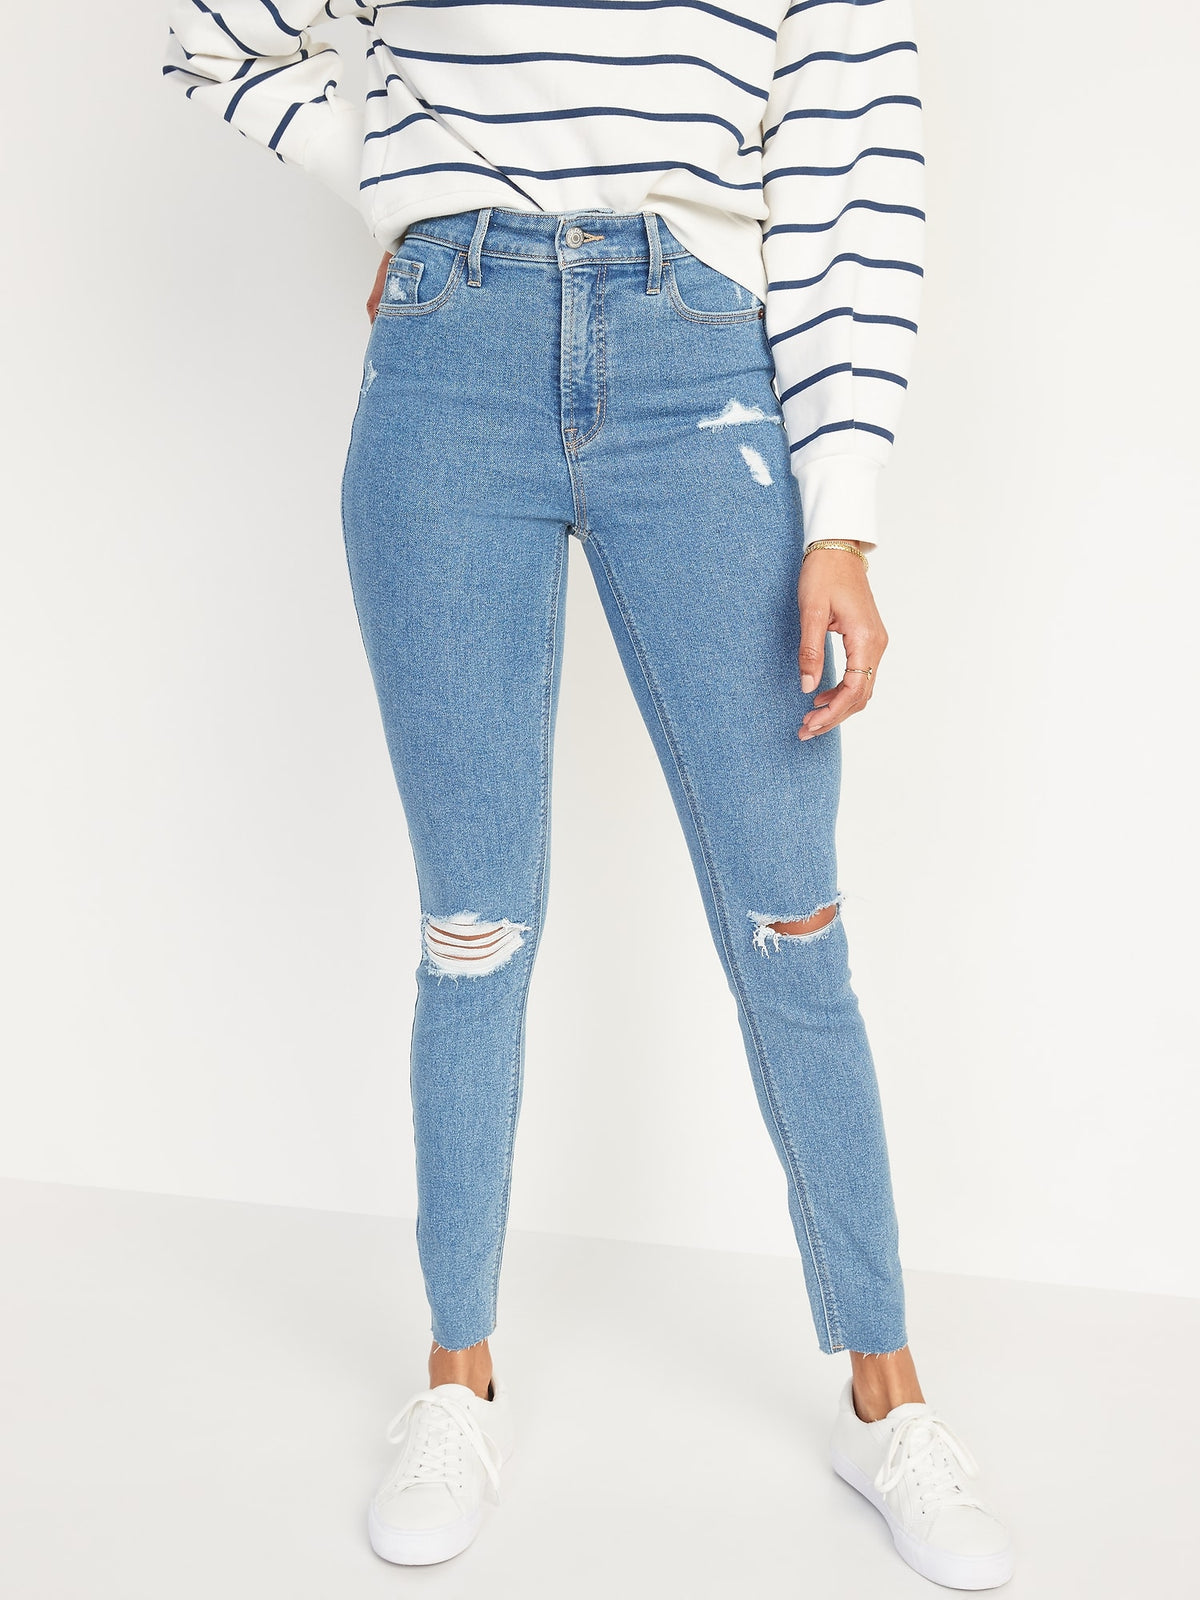 High-Waisted Rockstar Super-Skinny Ripped Ankle Jeans for Women - Old Navy  Philippines